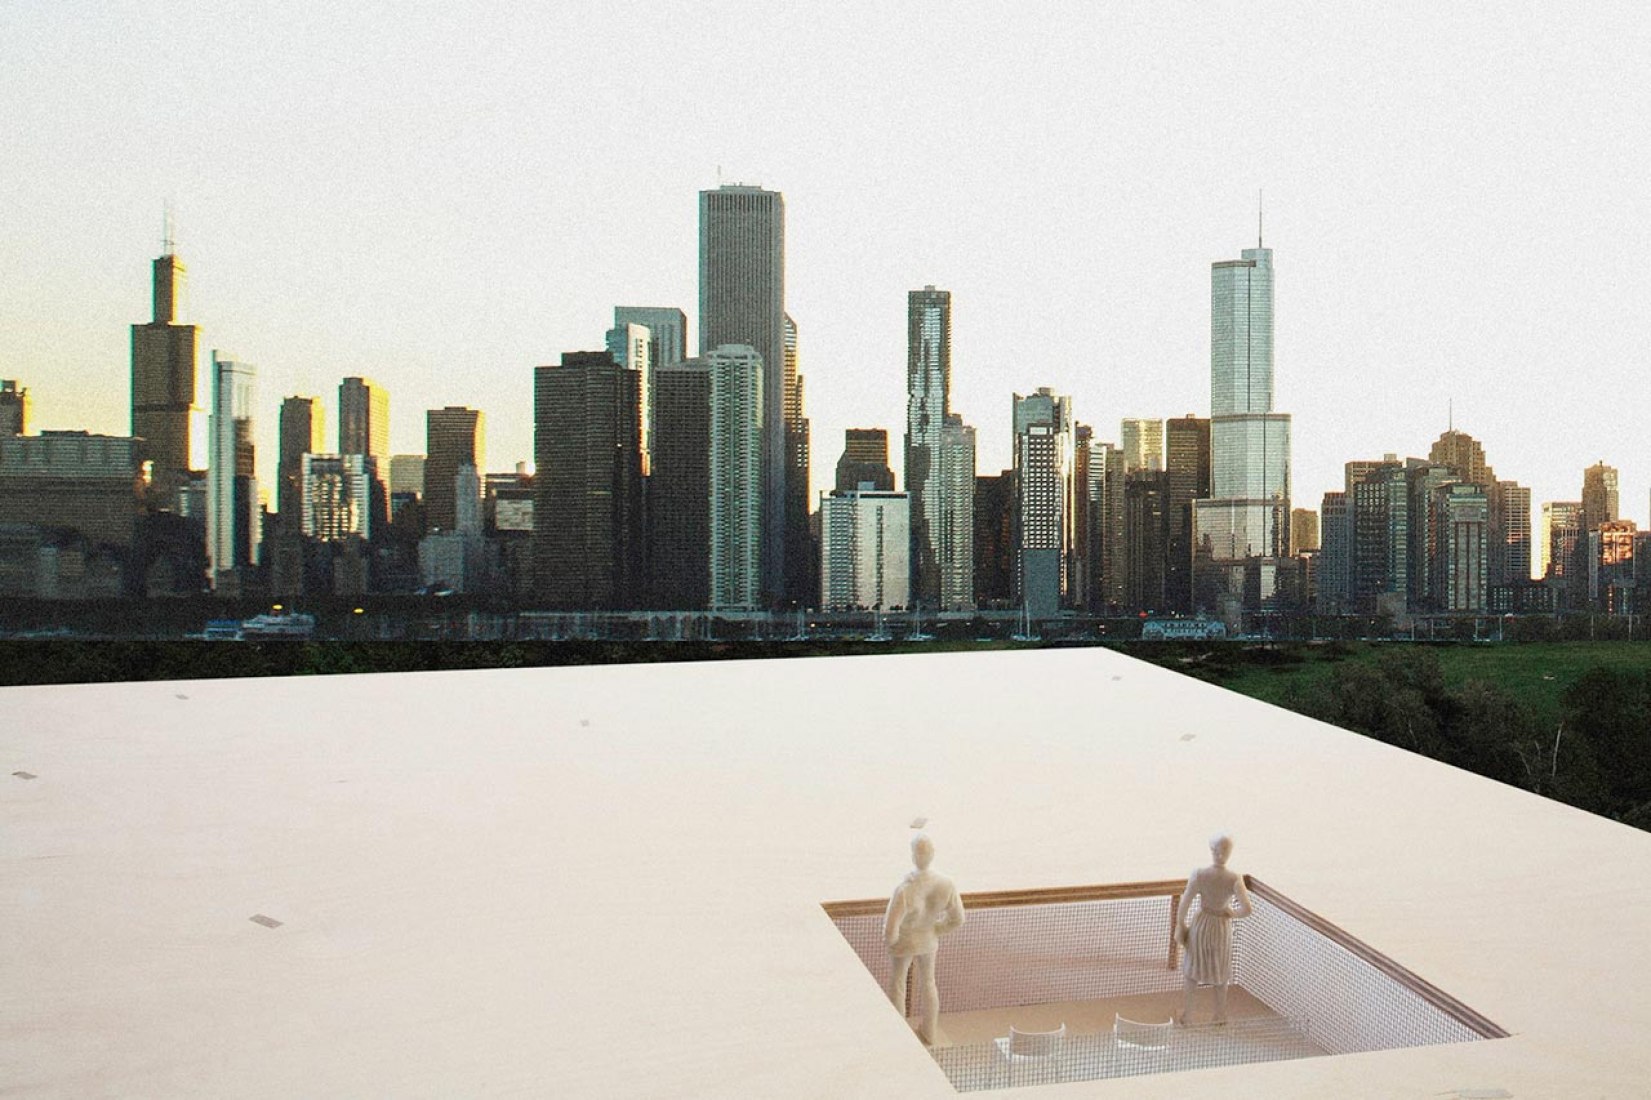 BP First Prize Winner.- Chicago Horizon by Ultramoderne. Image Courtesy of The Chicago Architecture Biennial.